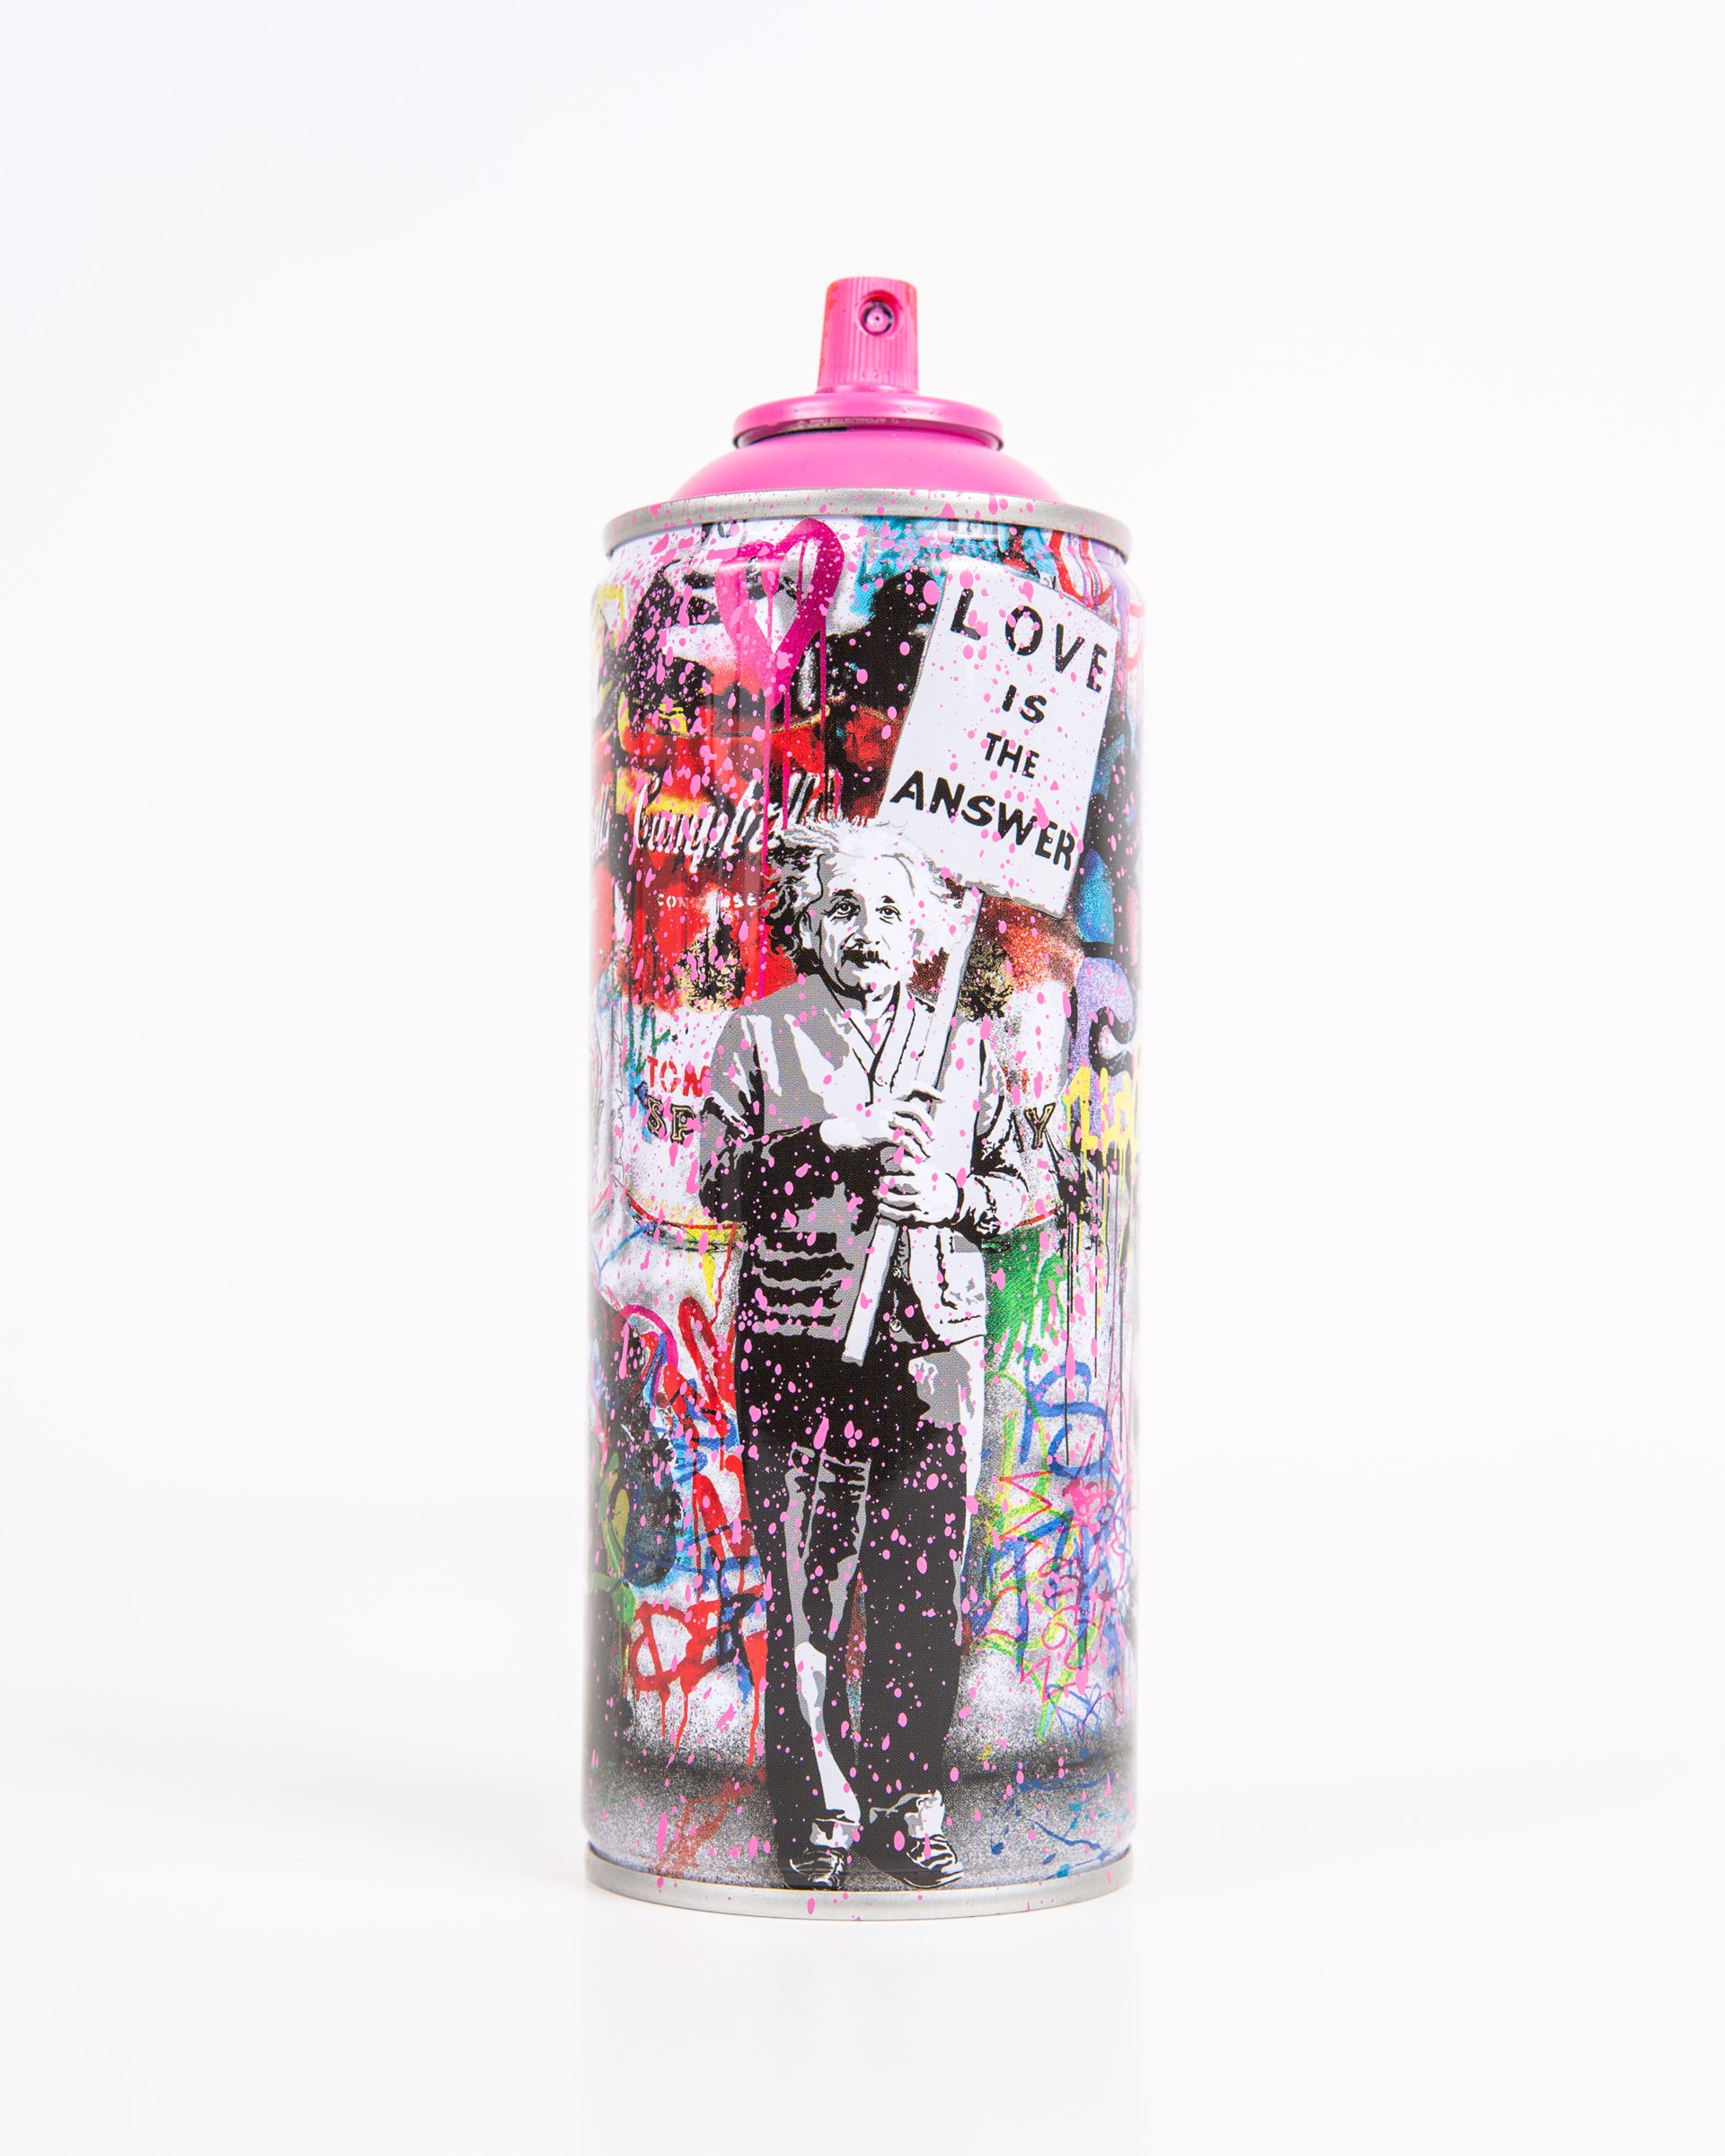 Love is the Answer - Pink by Mr.Brainwash